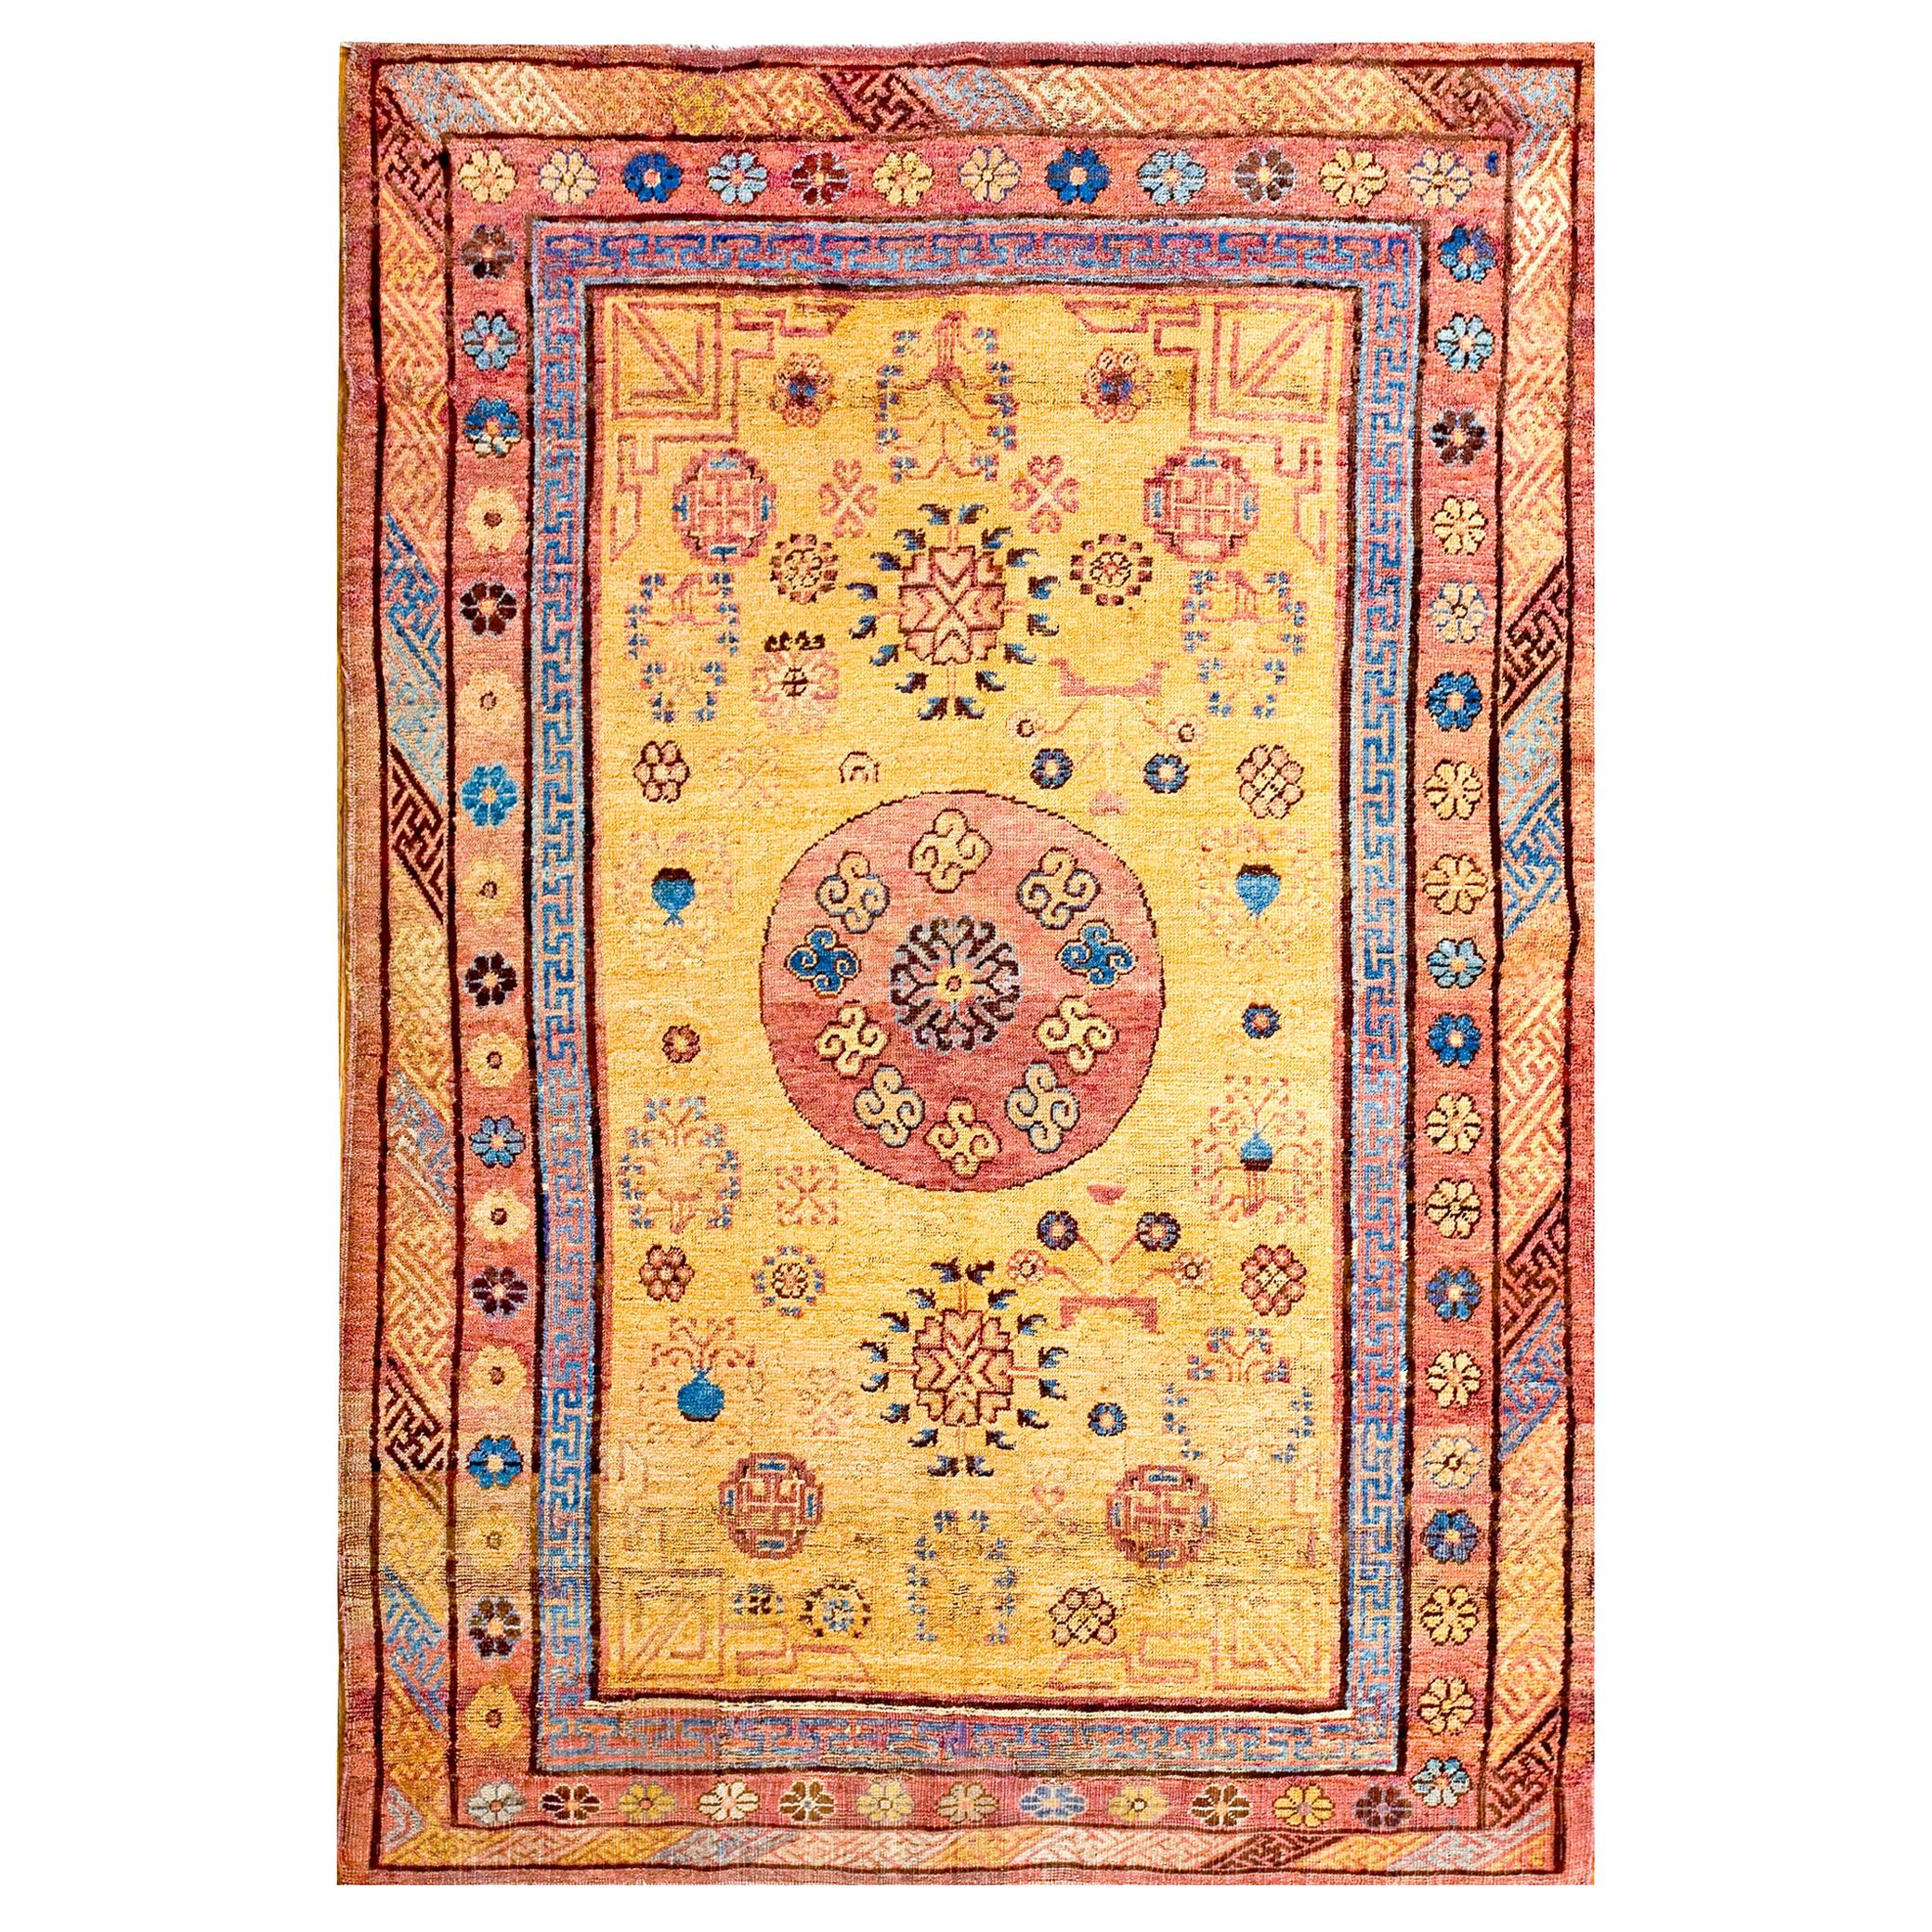 Early 19th Century Central Asian Chinese Khotan Carpet (4'10" x 7' - 147 x 213 )